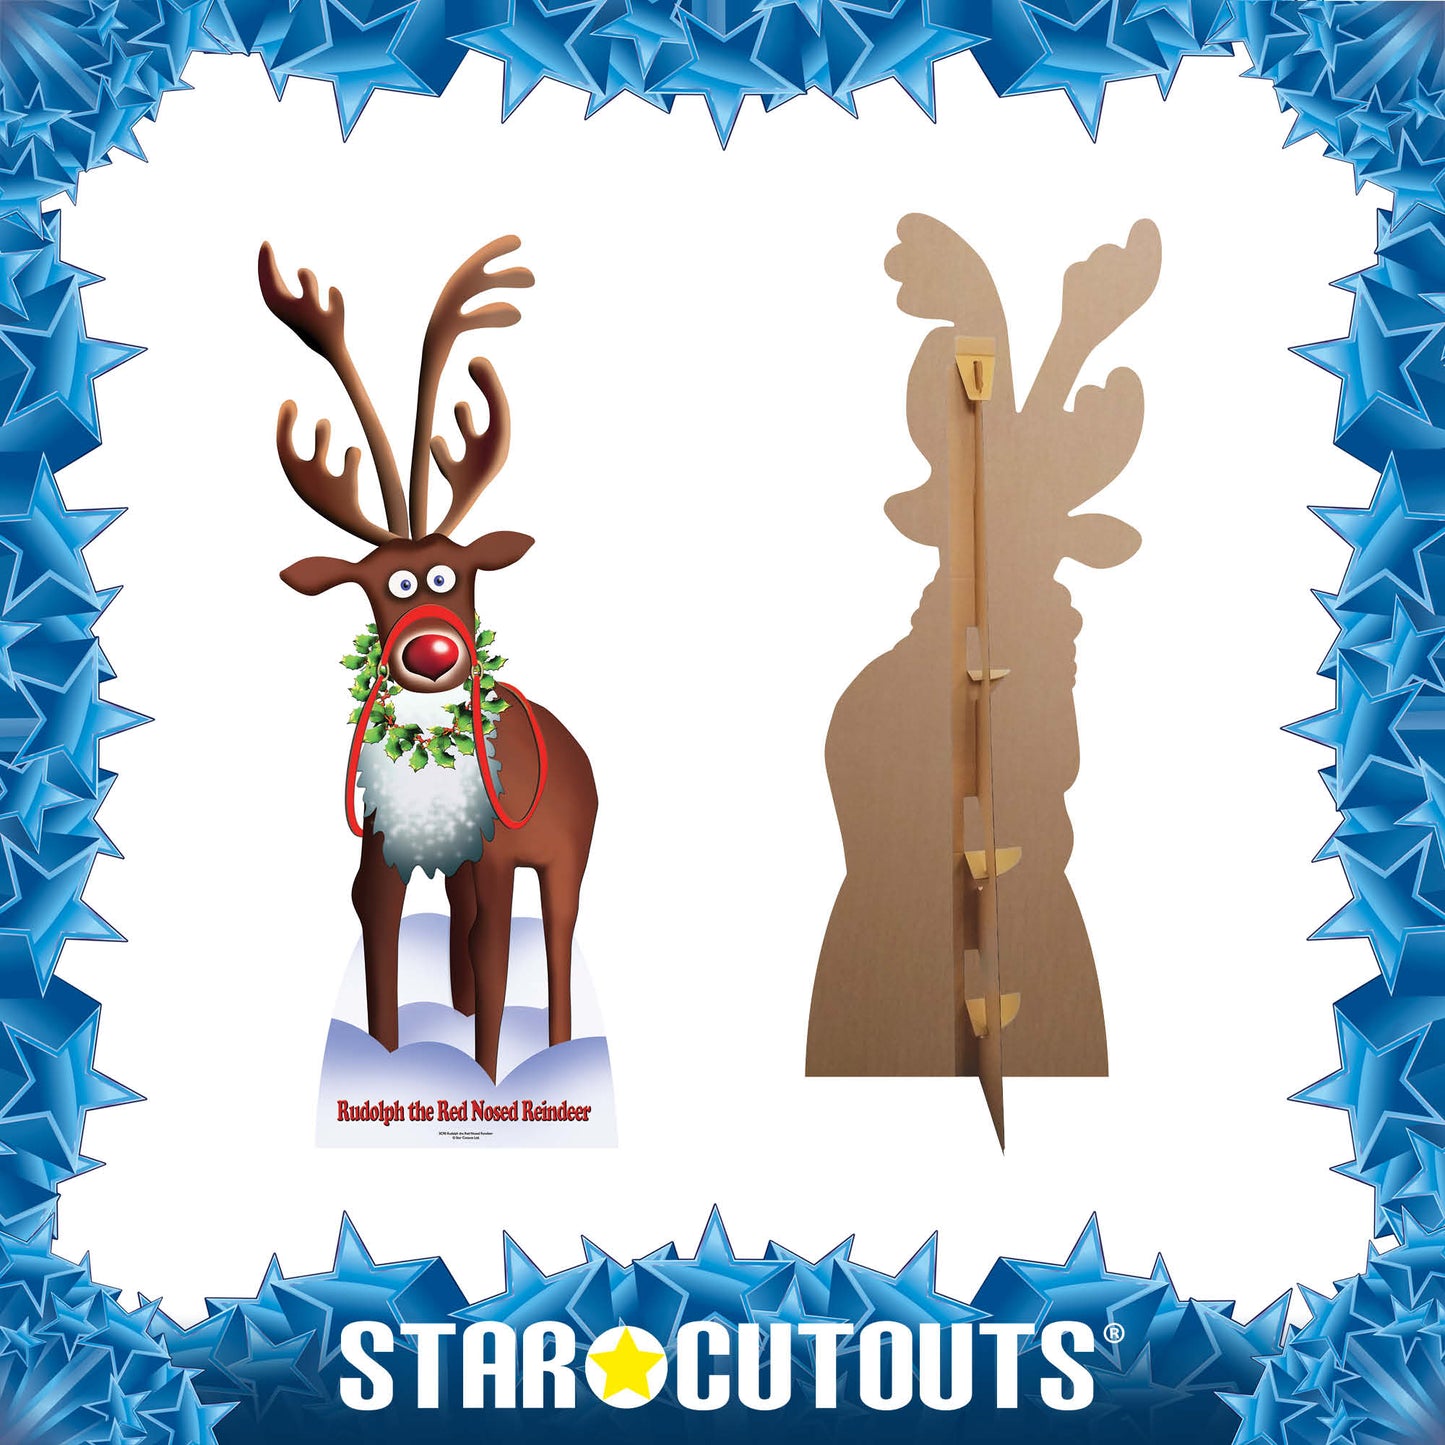 SC090 Rudolph the Red Nosed Reindeer Cardboard Cut Out Height 183cm - Star Cutouts